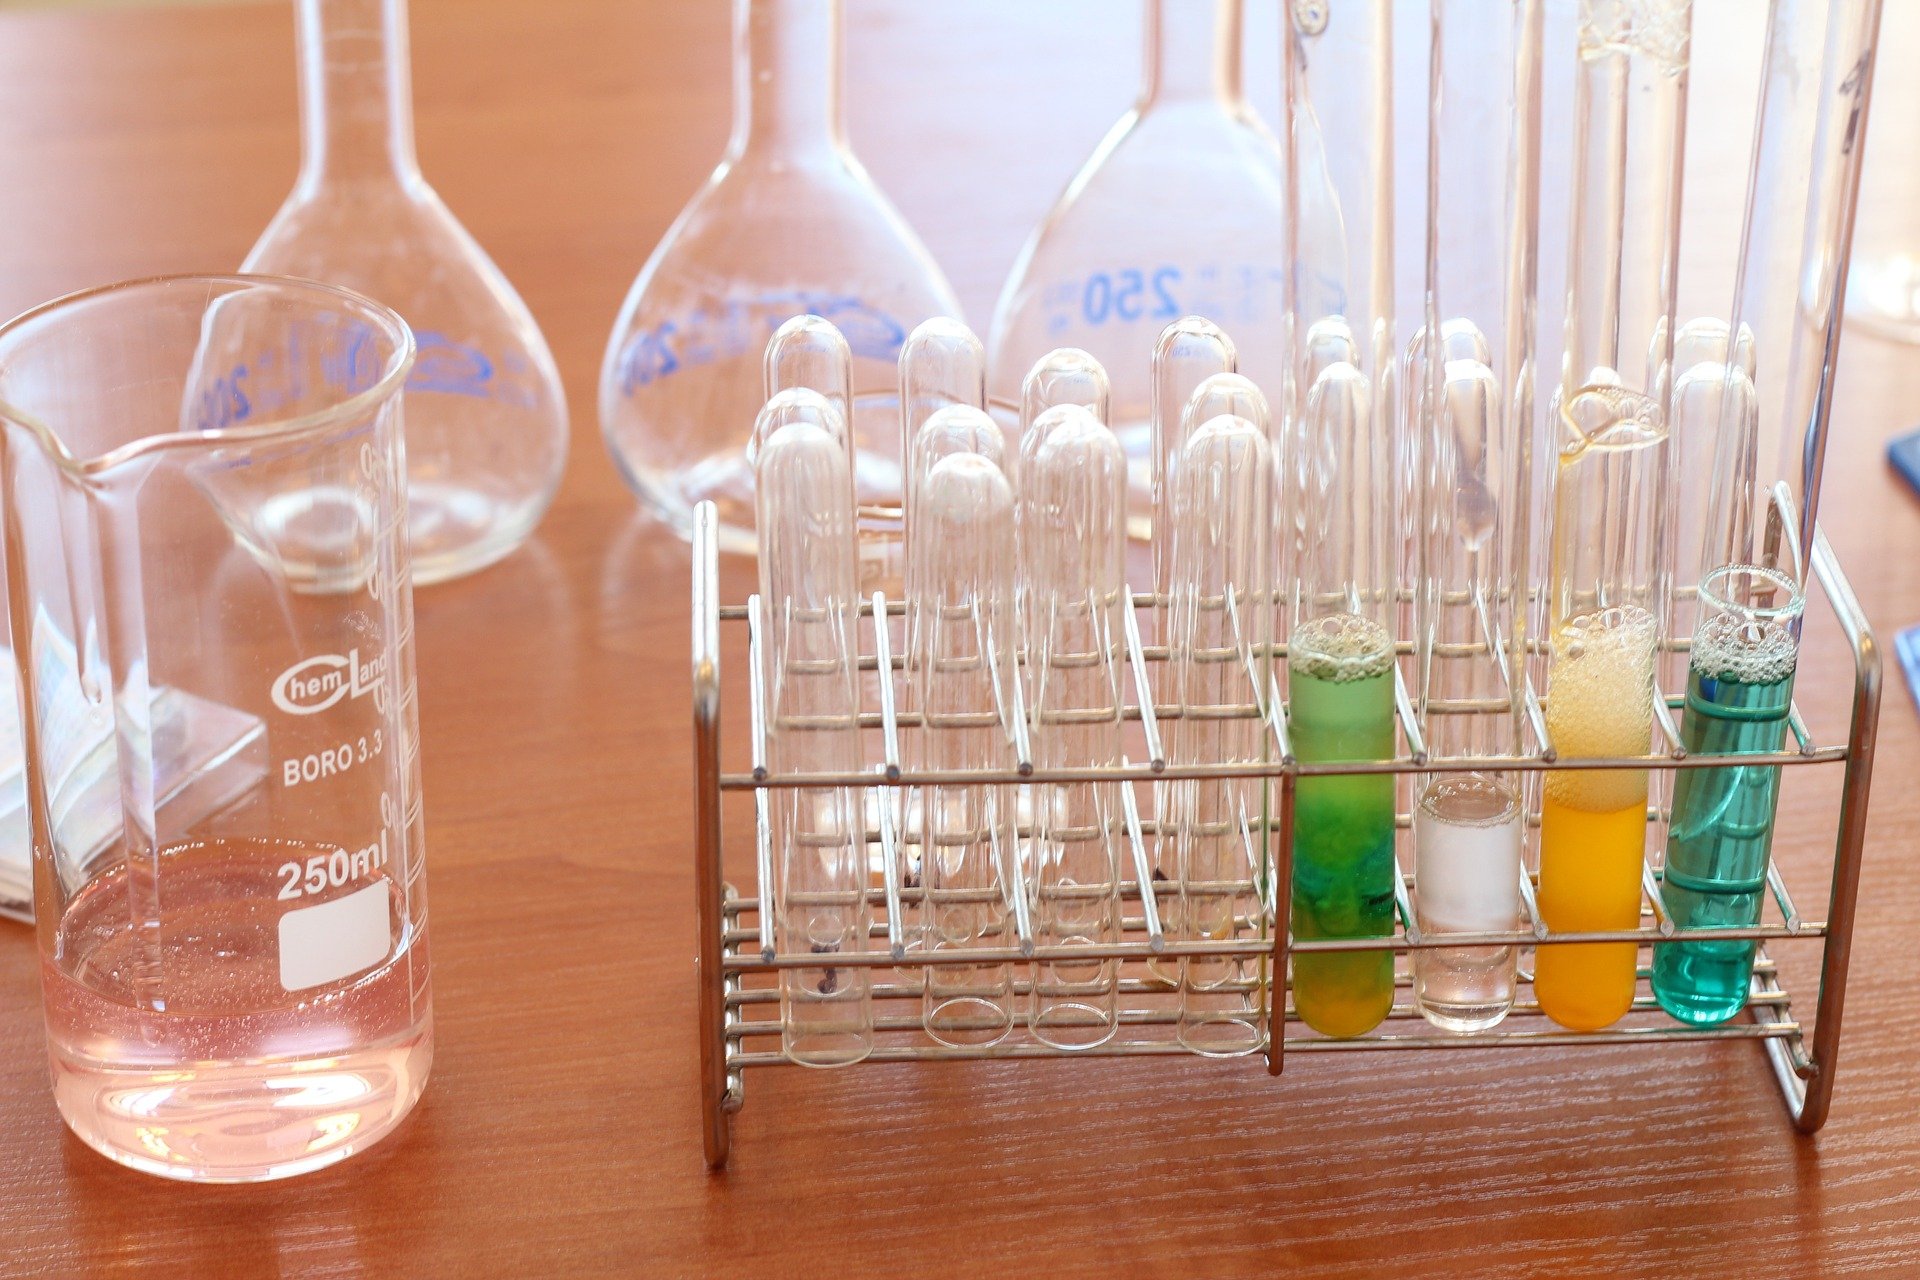 everyday chemicals in beakers test tubes